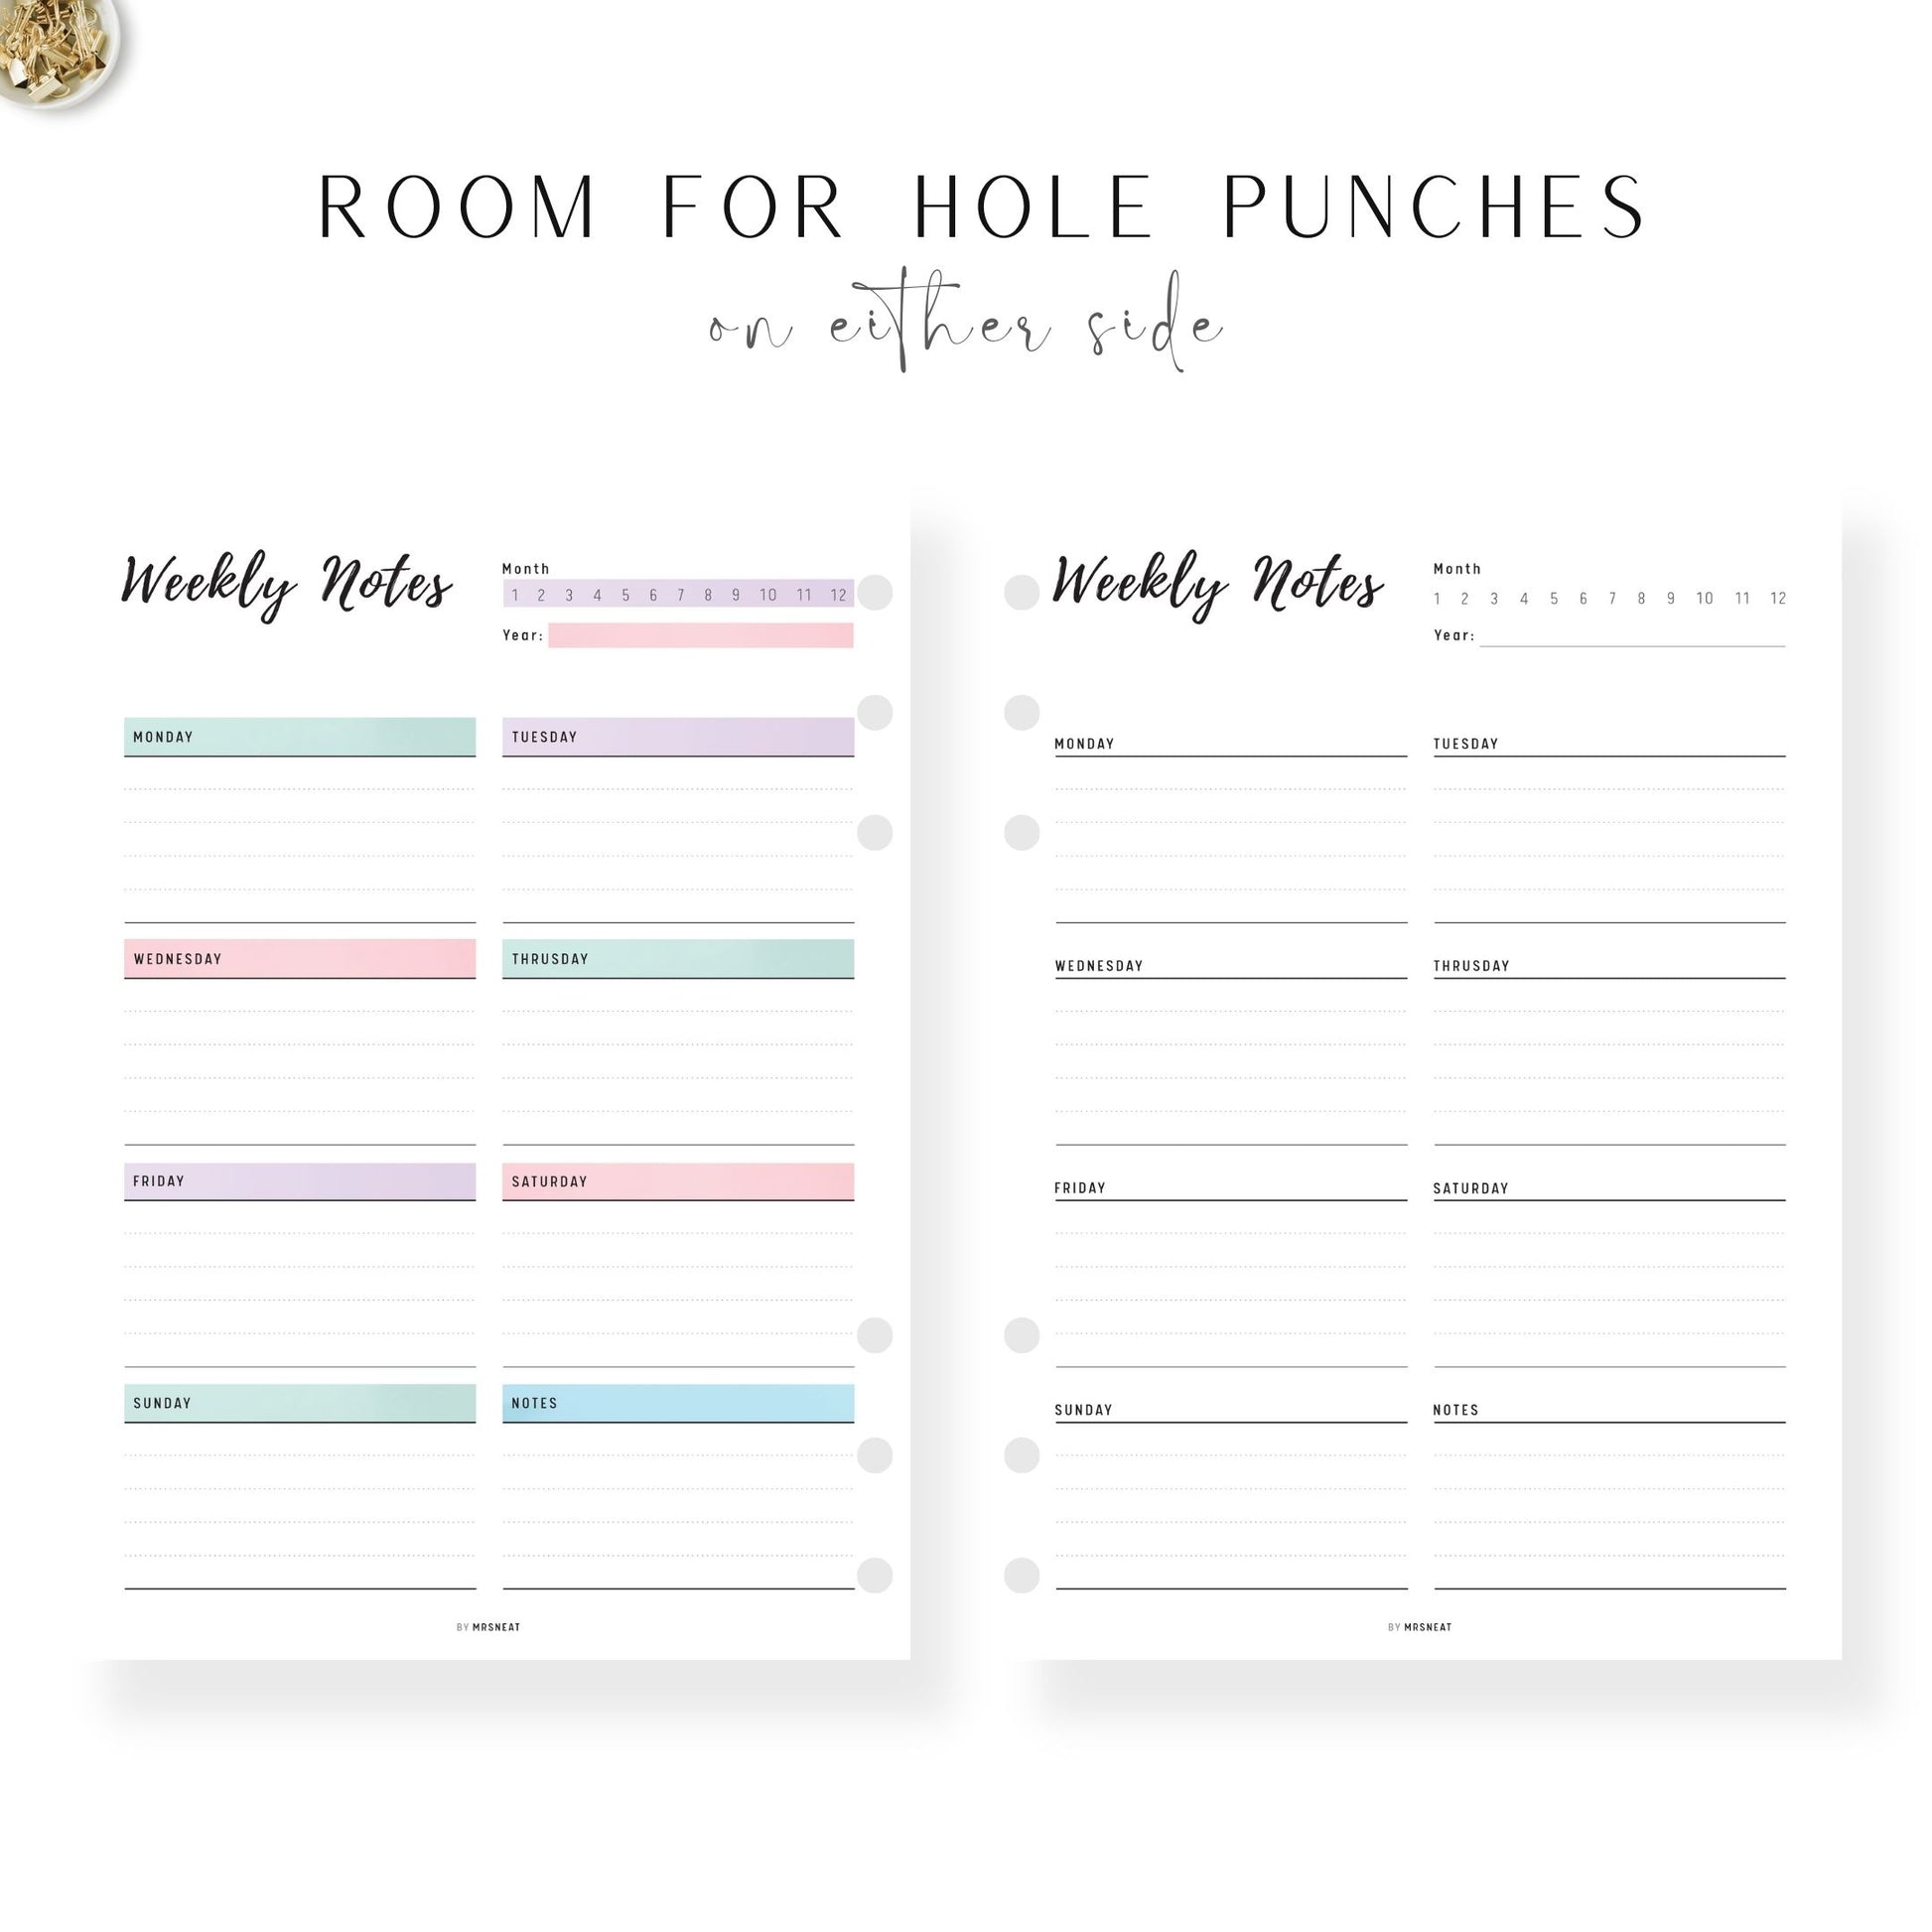 Weekly Notes Template Printable, 2 color options, PDF